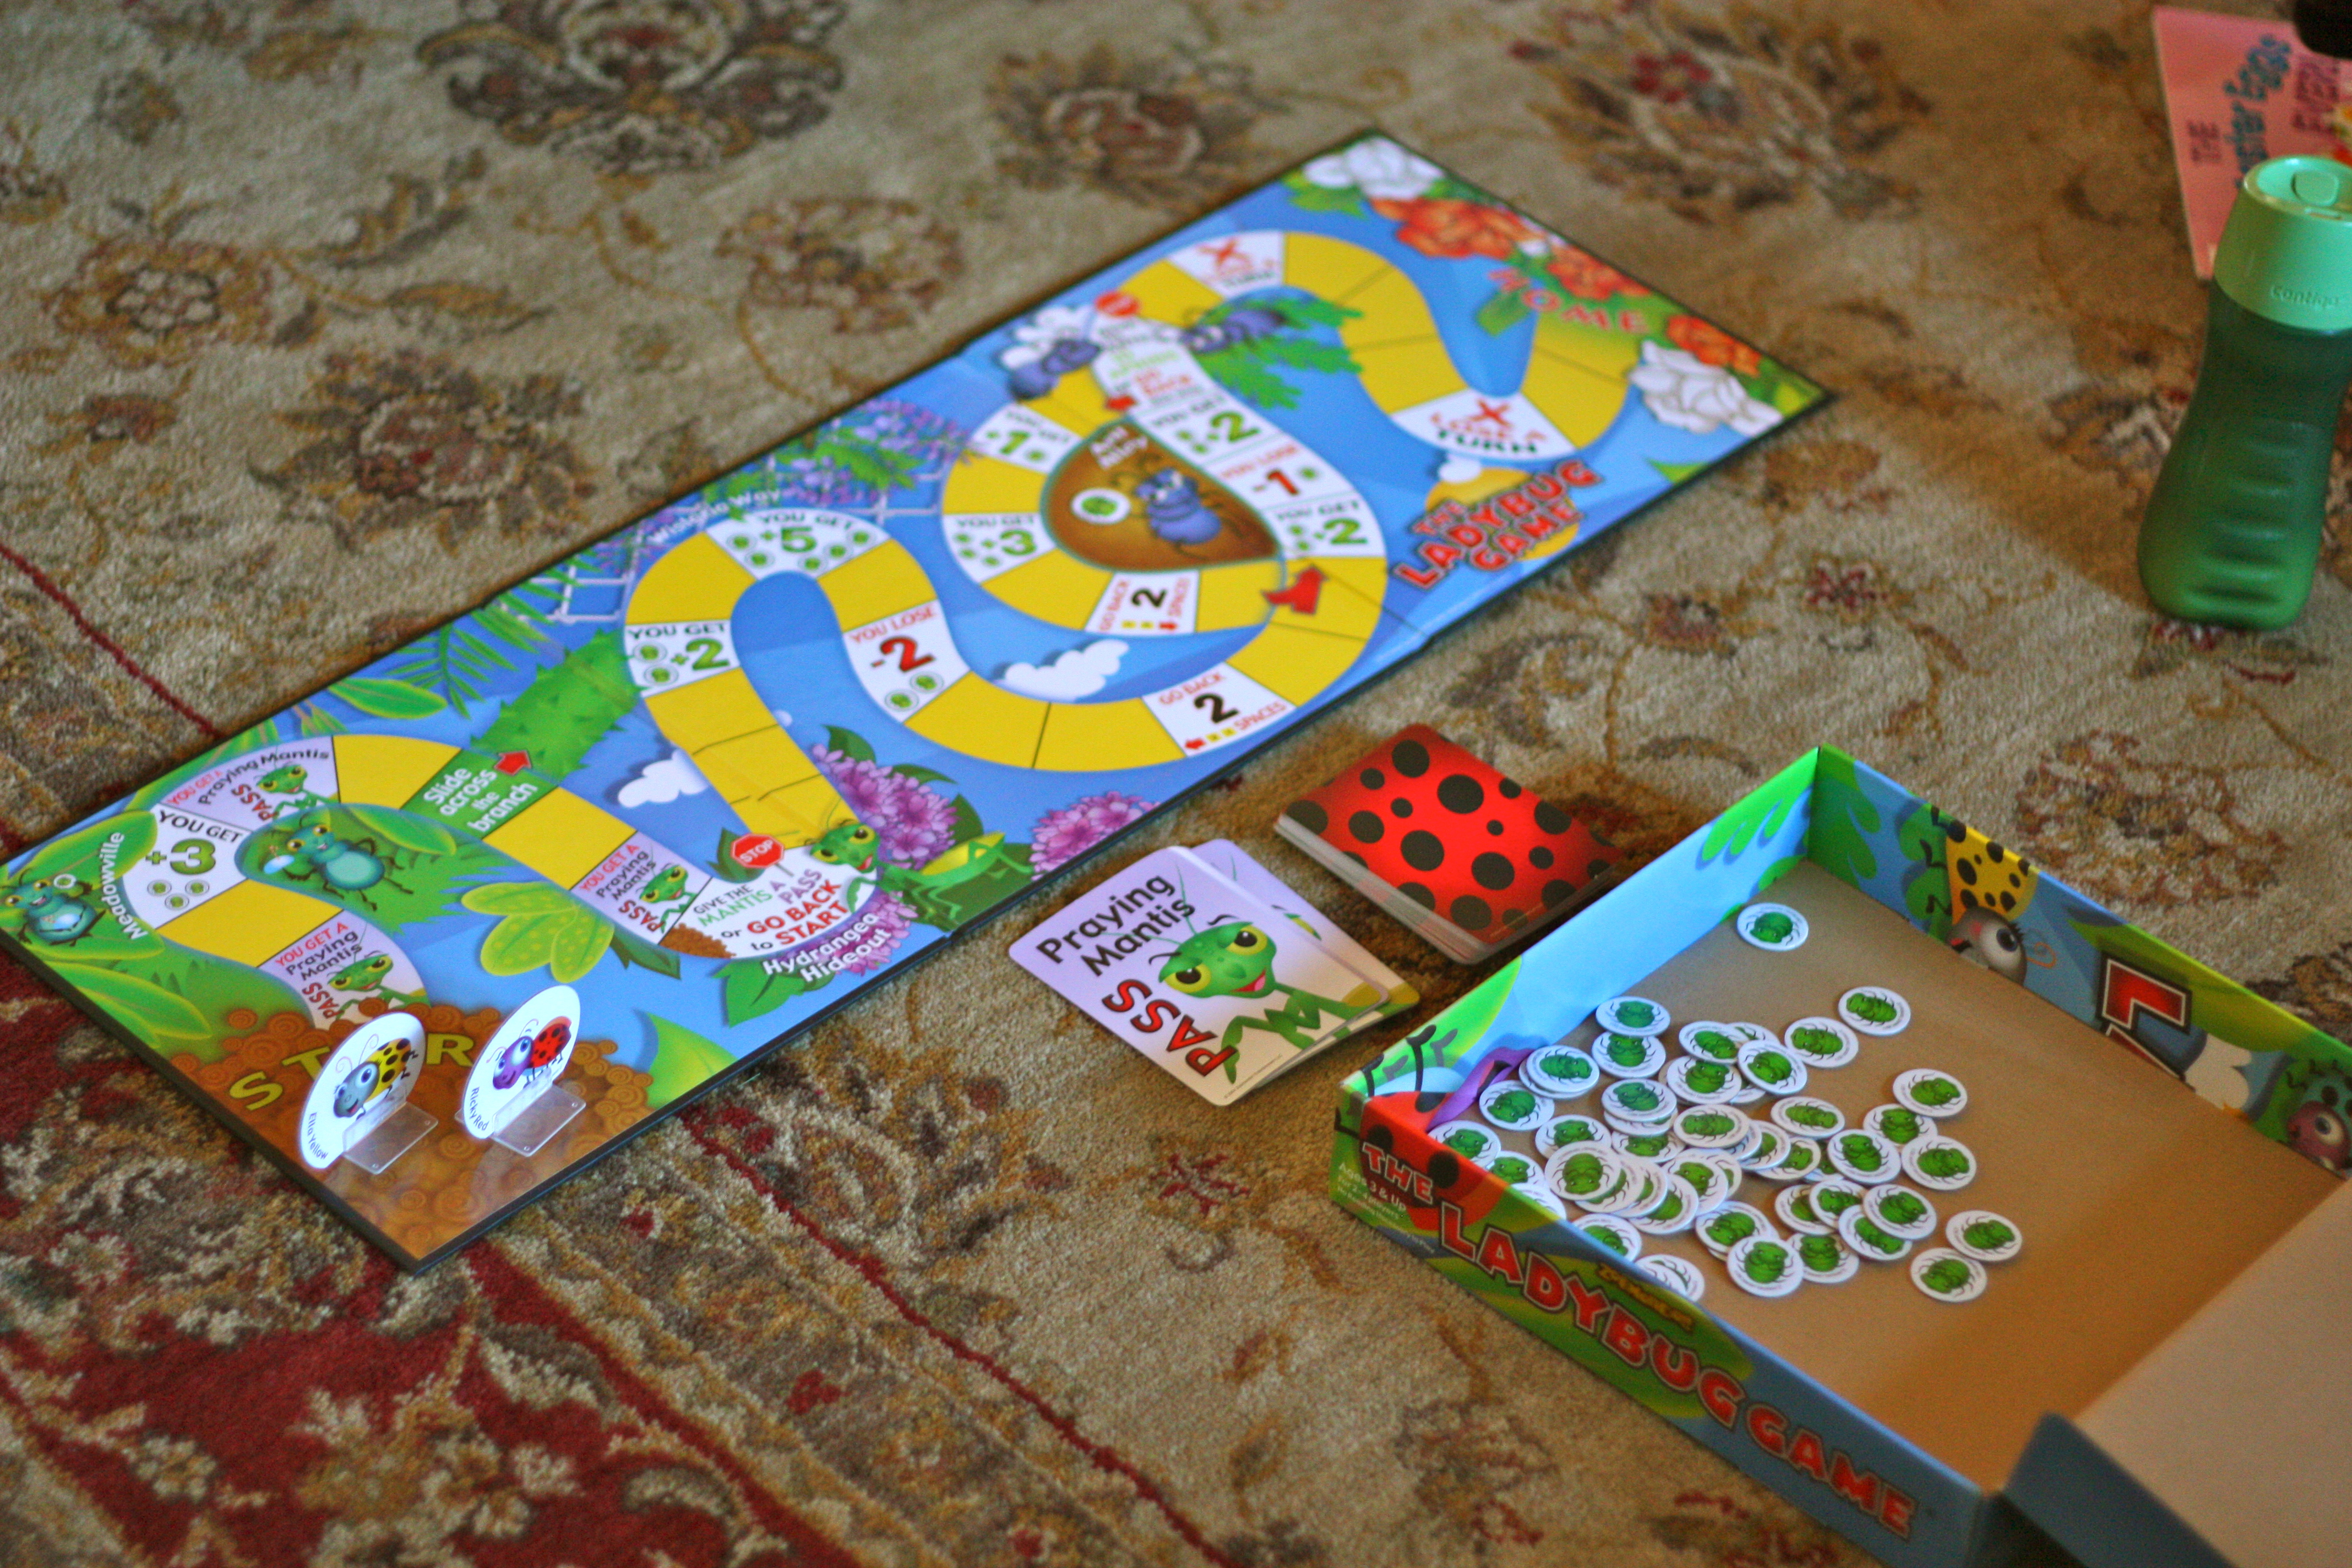 best board games for 5 year olds